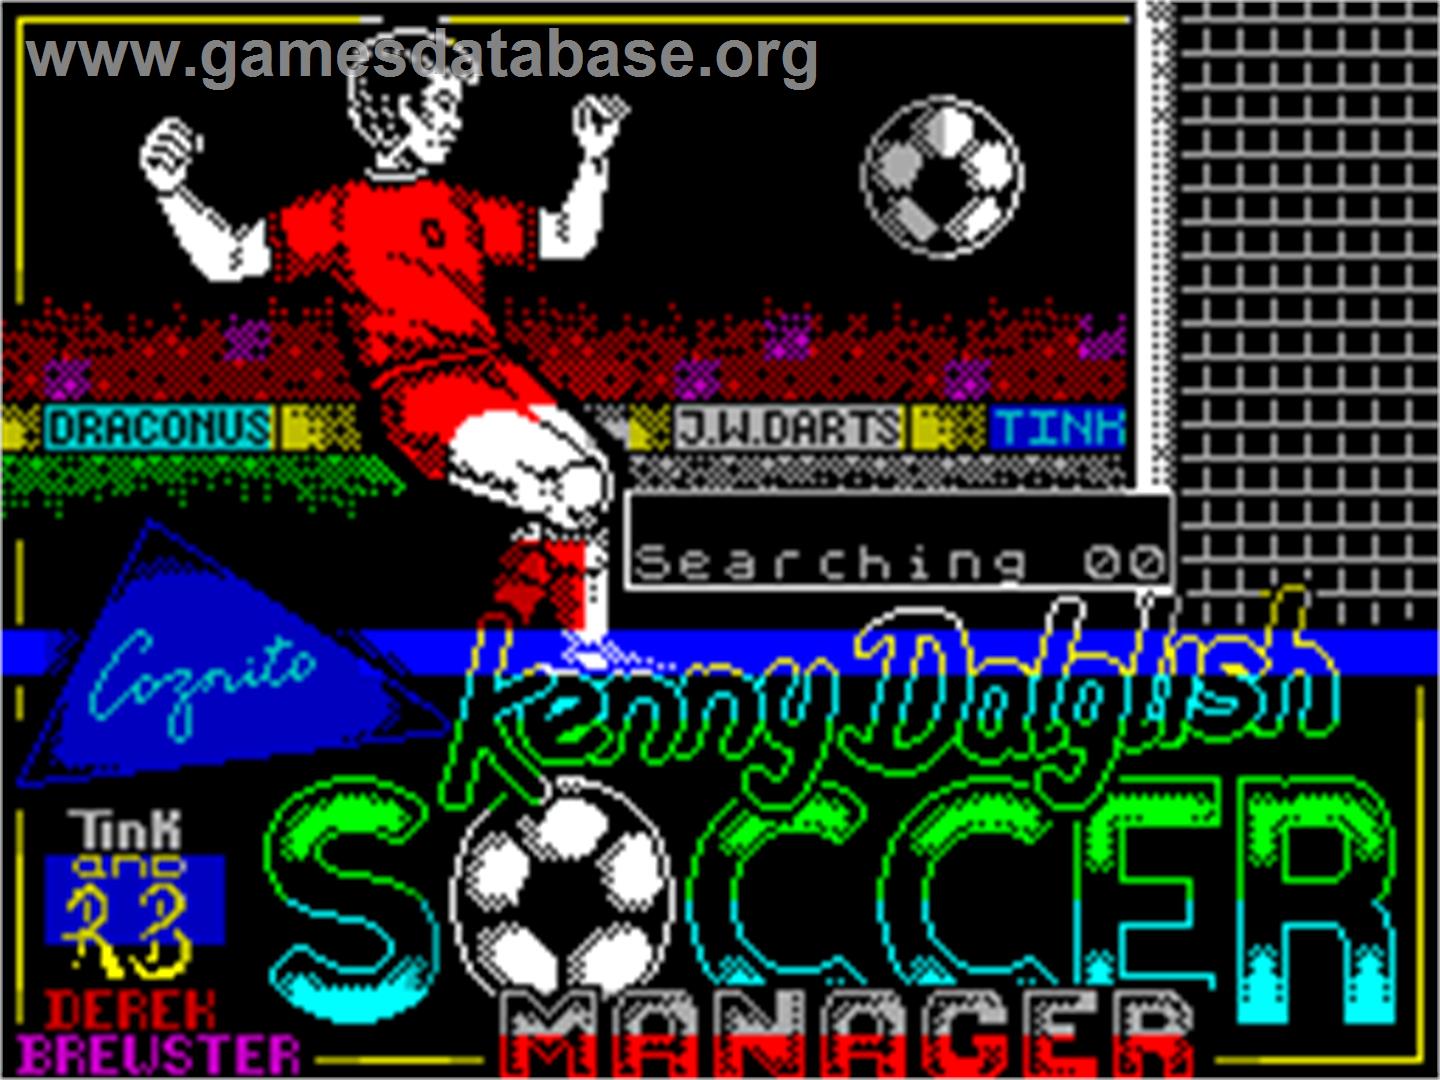 Kenny Dalglish Soccer Manager - Sinclair ZX Spectrum - Artwork - Title Screen